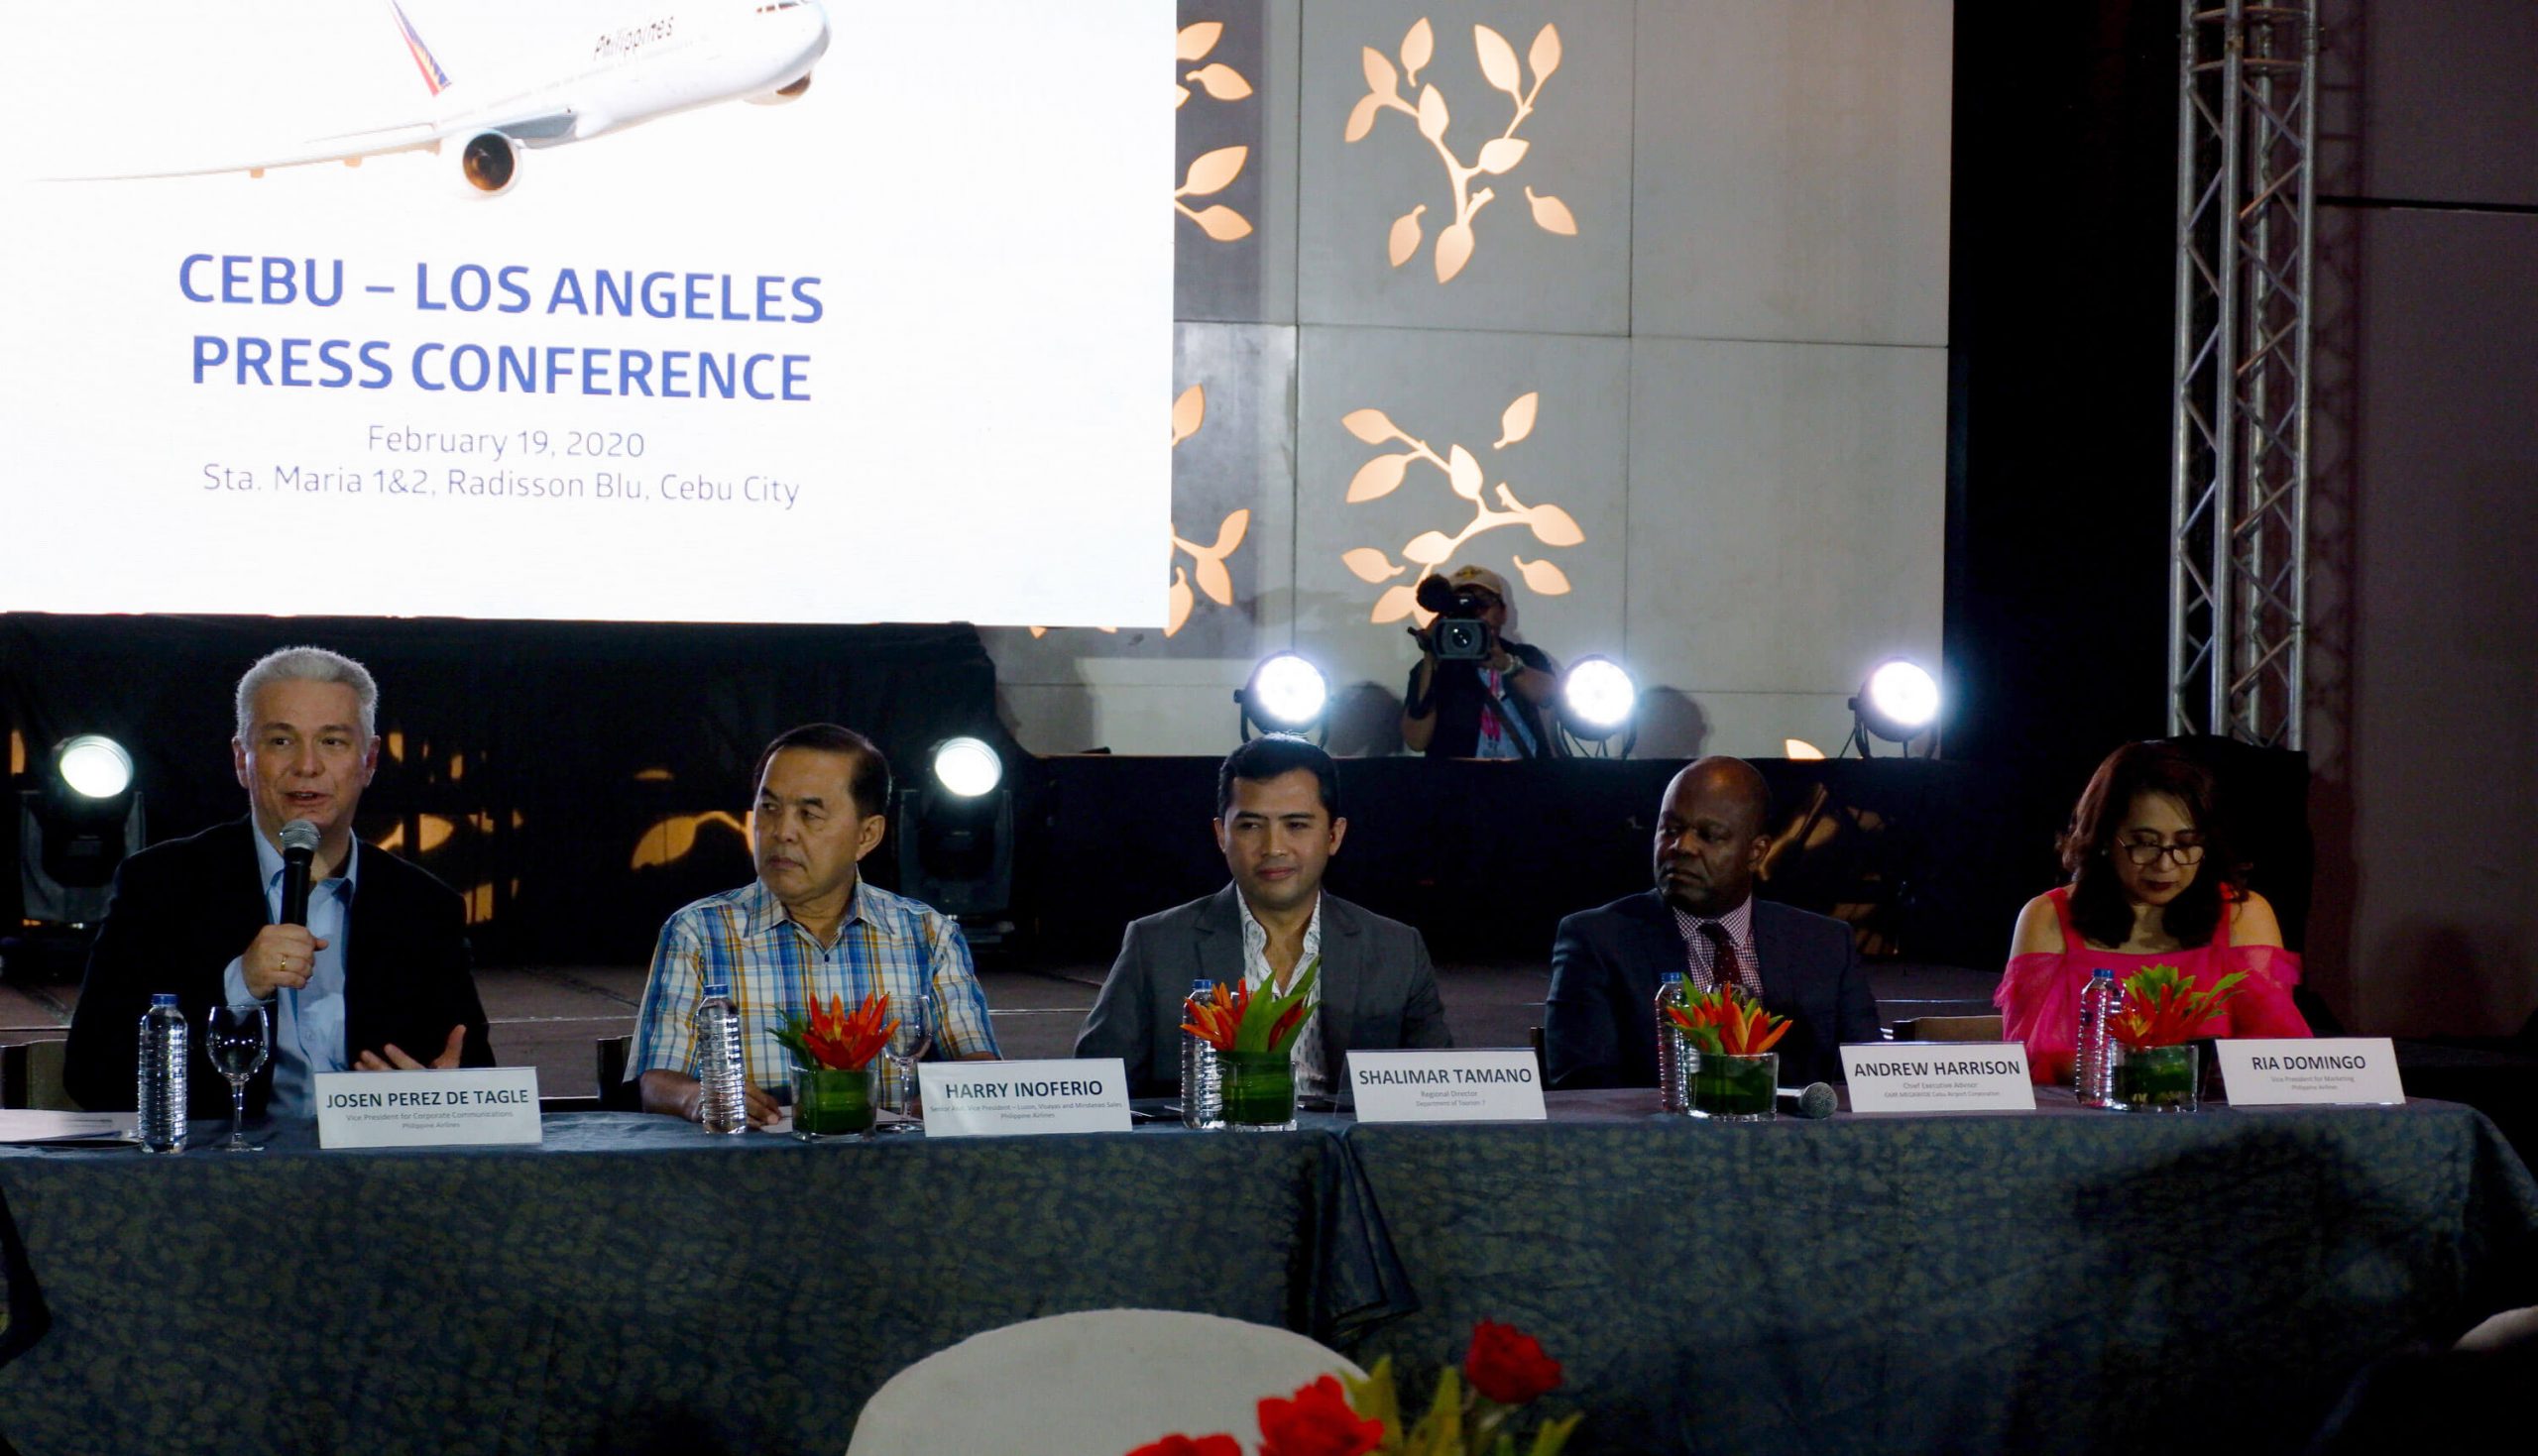 ANNOUNCEMENT. PAL officials and partners answer questions during the launching of the route. From left are, Josen Perez de Tagle, PAL Vice President for Corporate Communications; Harry Inoferio, PAL Senior Assistant Vice President for Sales; Shalimar Tamano, Department of Tourism 7 Regional Director; Andre Harrison, GMR Megawide Cebu Airport Corporation Chief Executive Advisor; and Ria Domingo, PAL Vice President for Marketing.